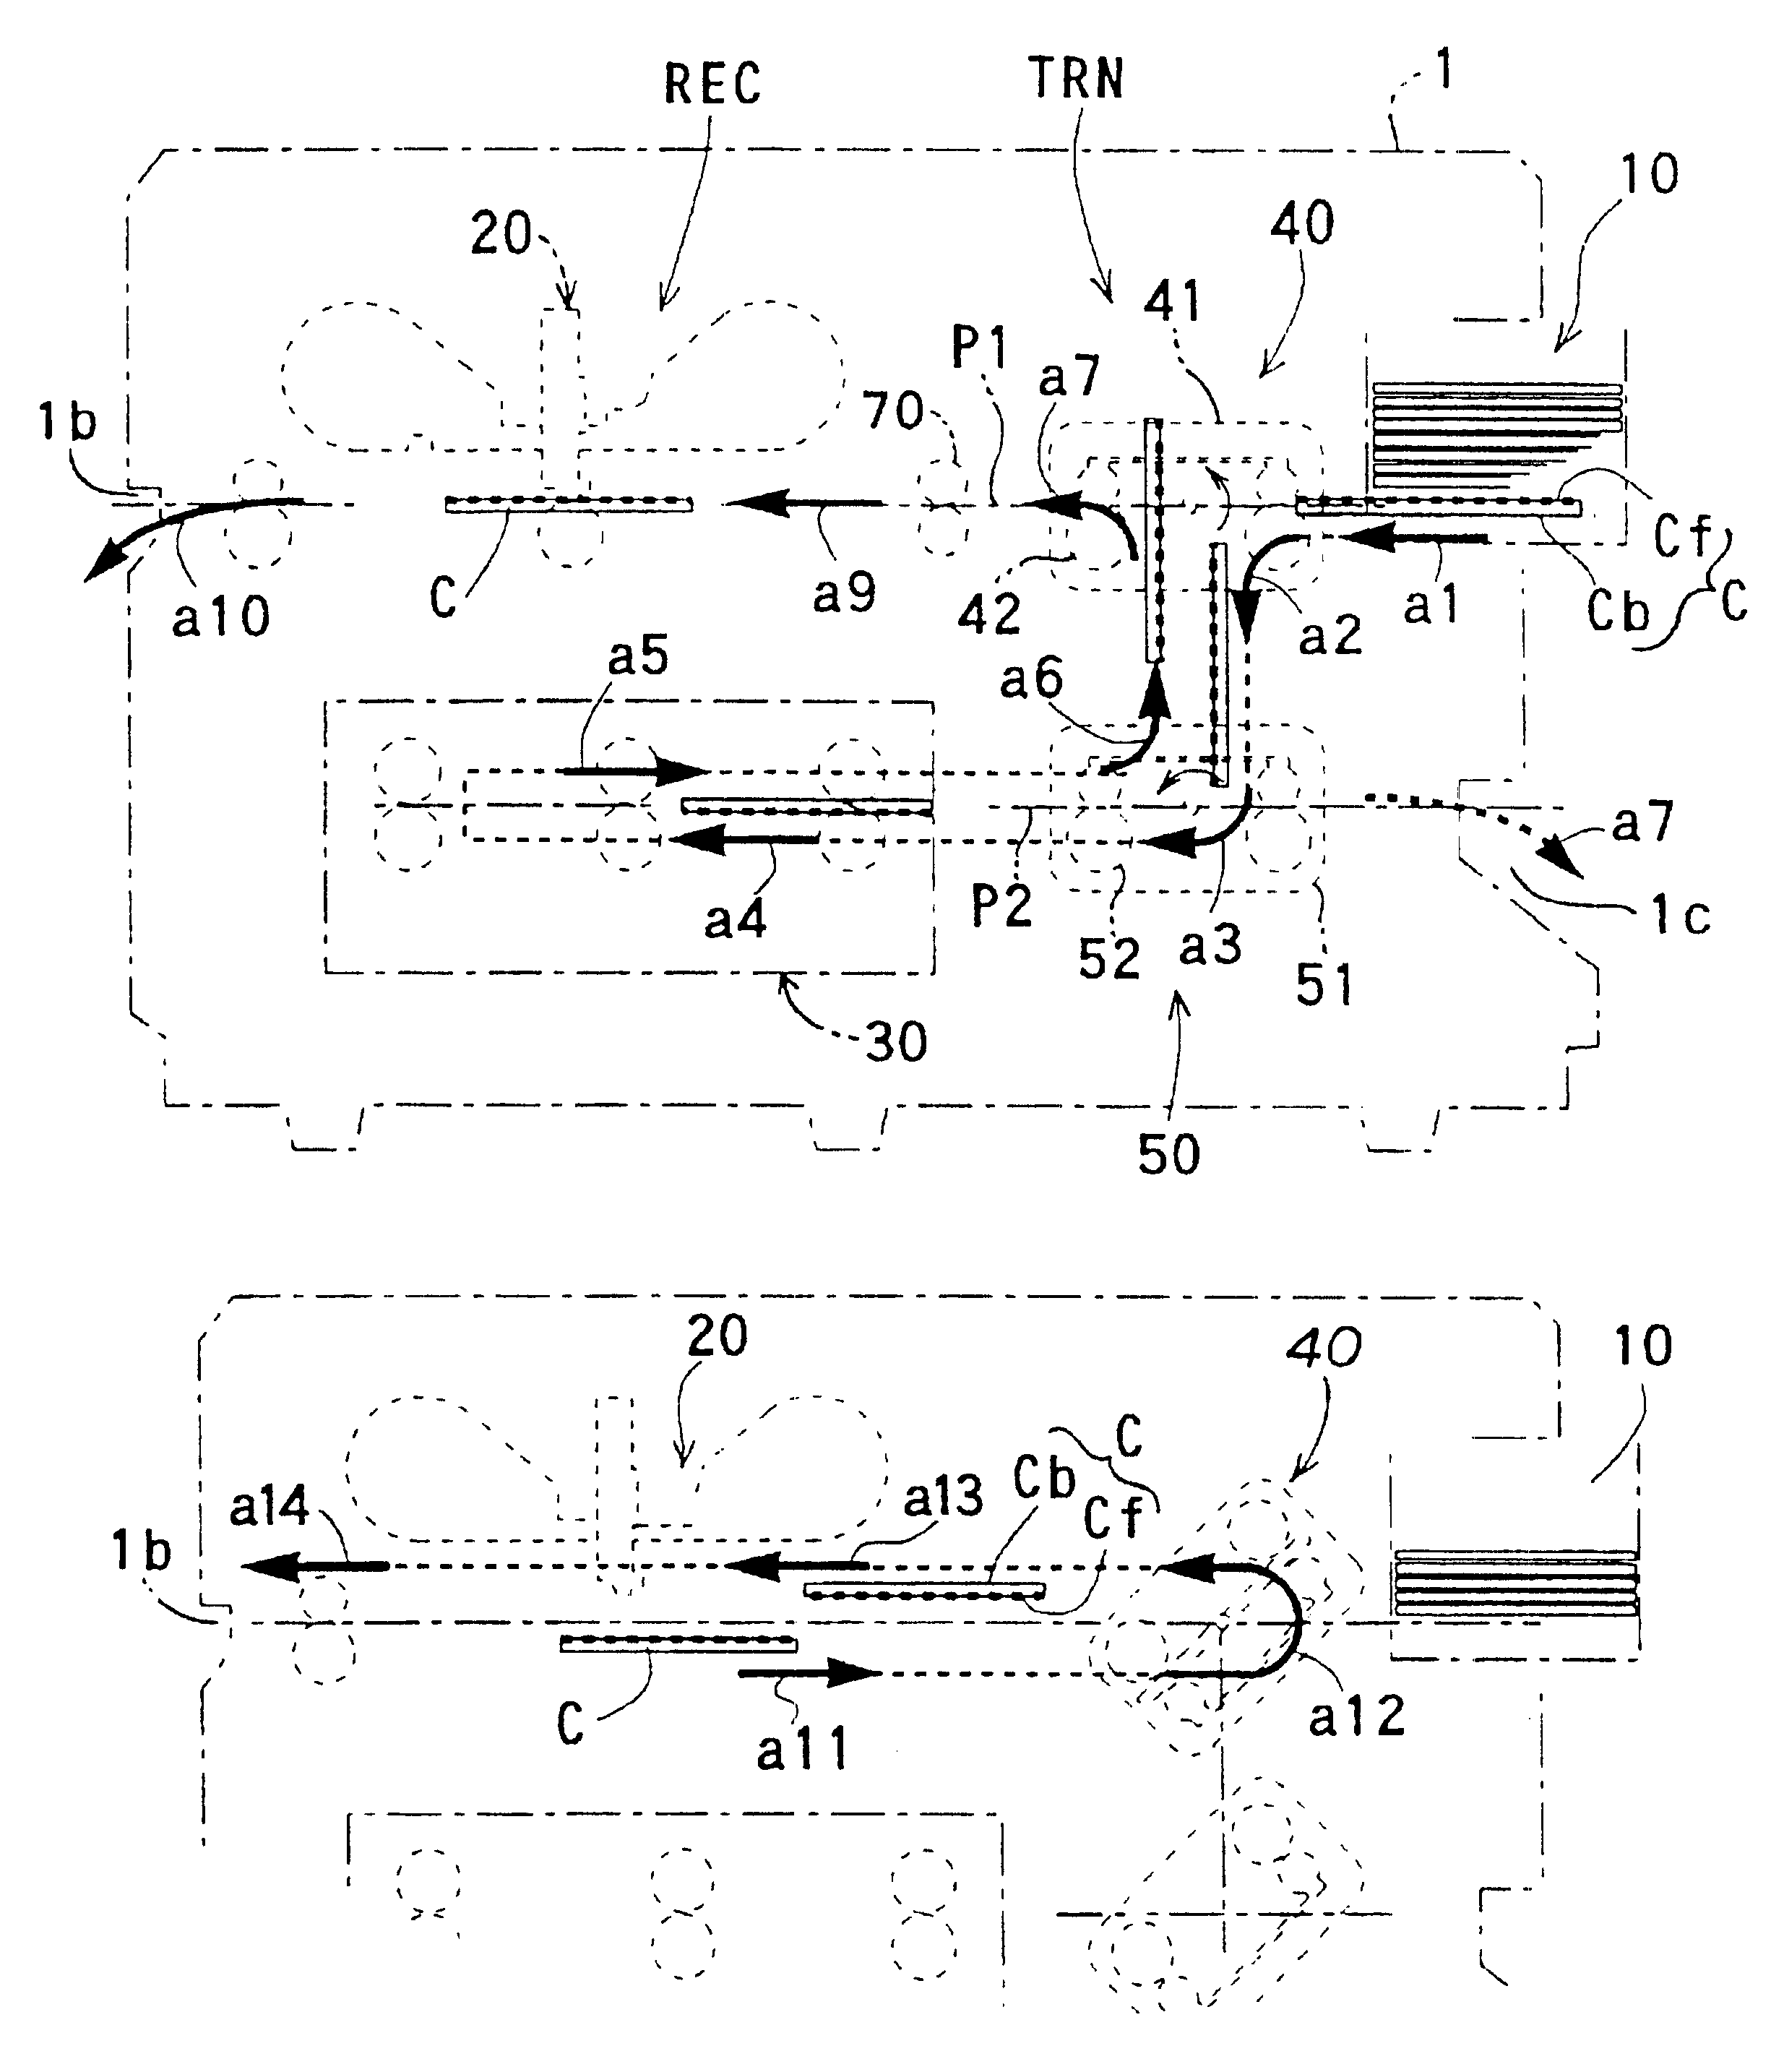 Information card producing device